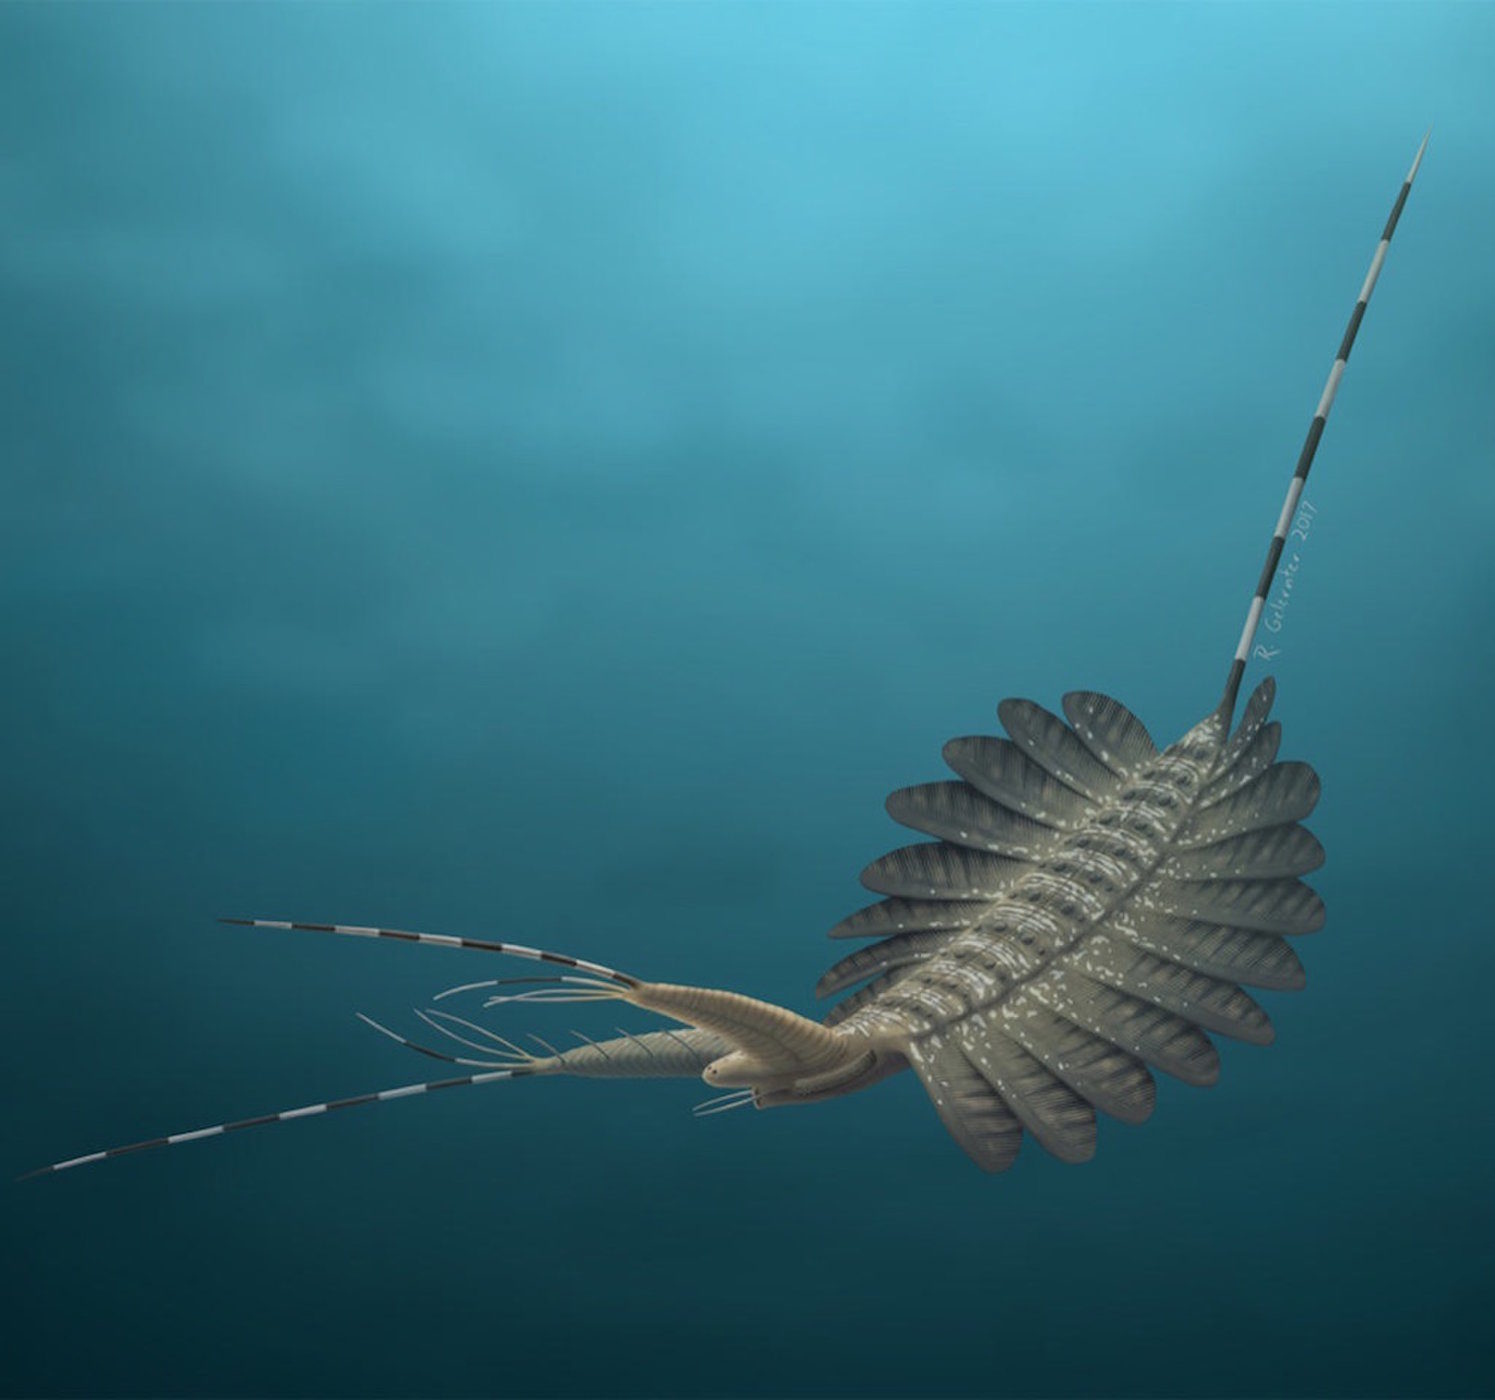 Fossilized brains of ancient 'sea monster' discovered in Greenland ...